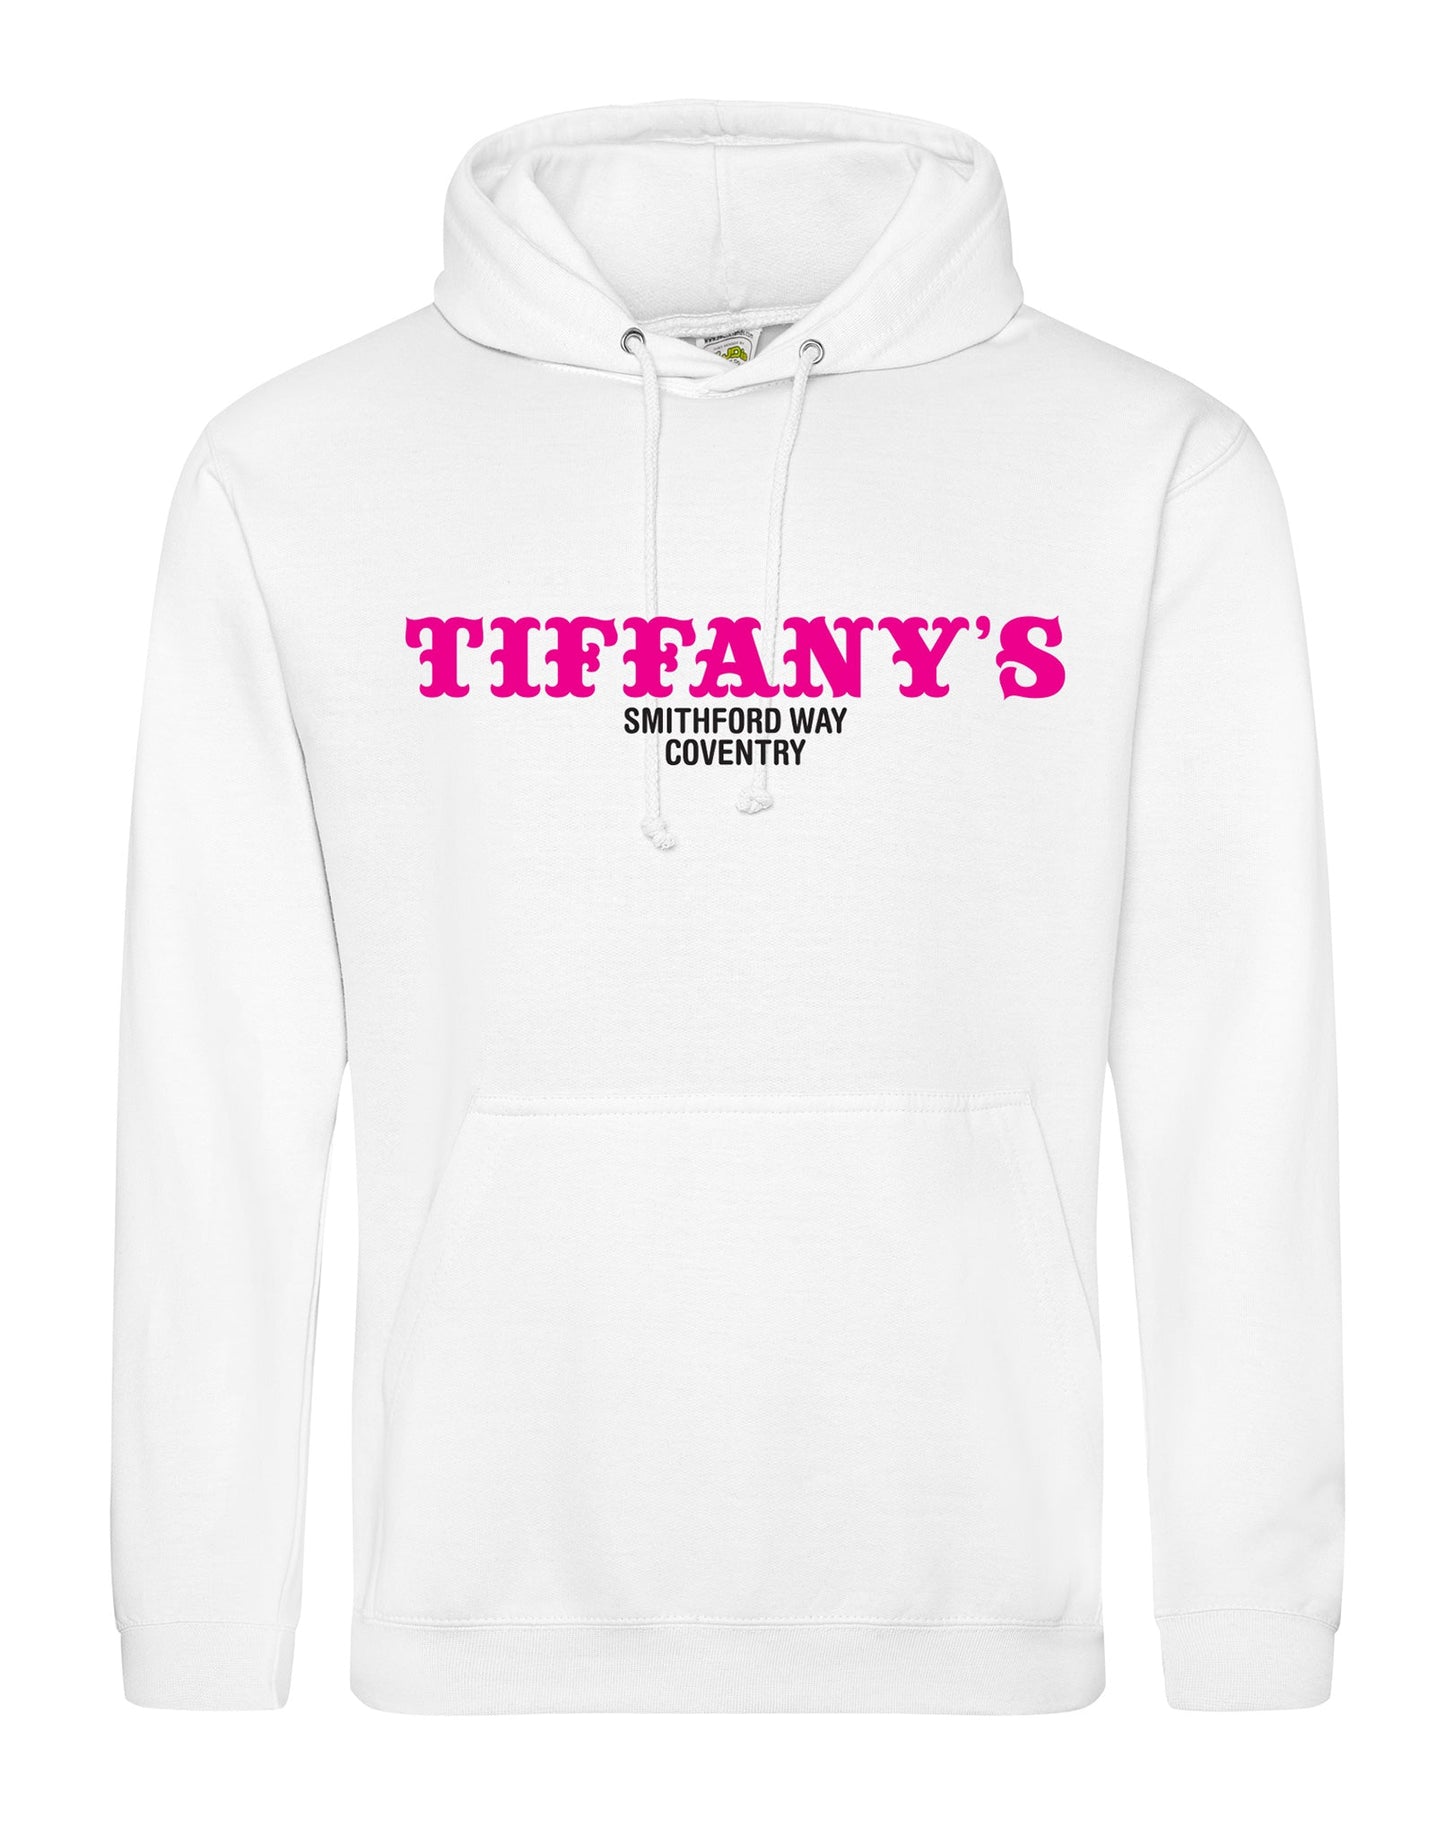 Tiffany's Coventry unisex fit hoodie - various colours - Dirty Stop Outs